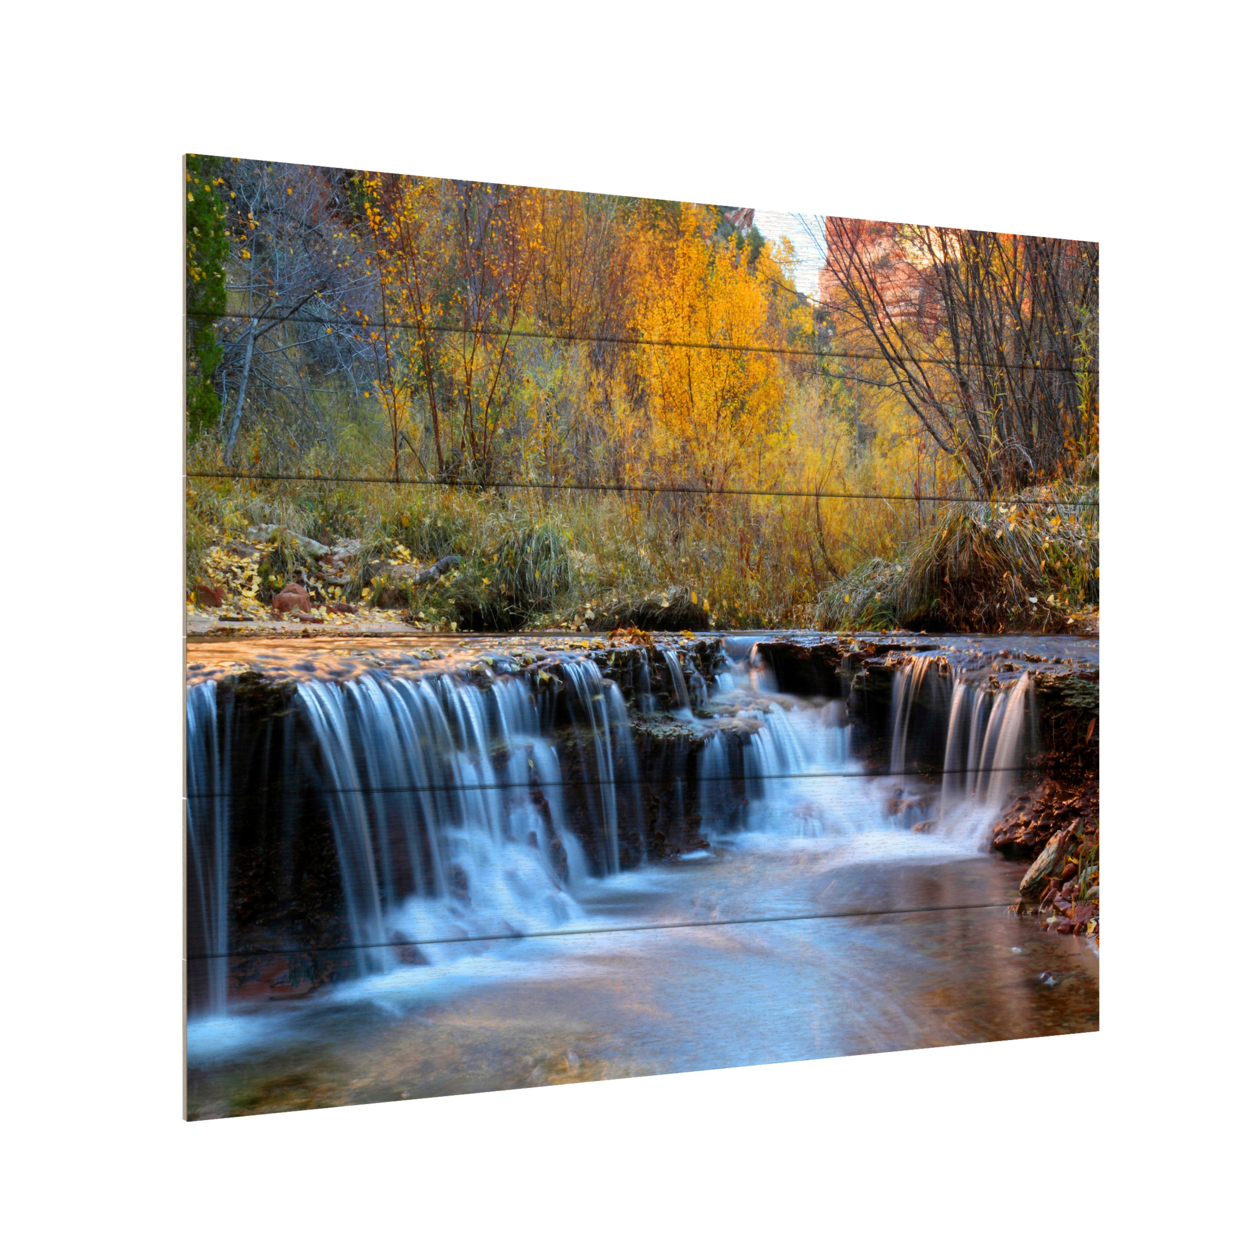 Wooden Slat Art 18 X 22 Inches Titled Zion Autumn Ready To Hang Home Decor Picture